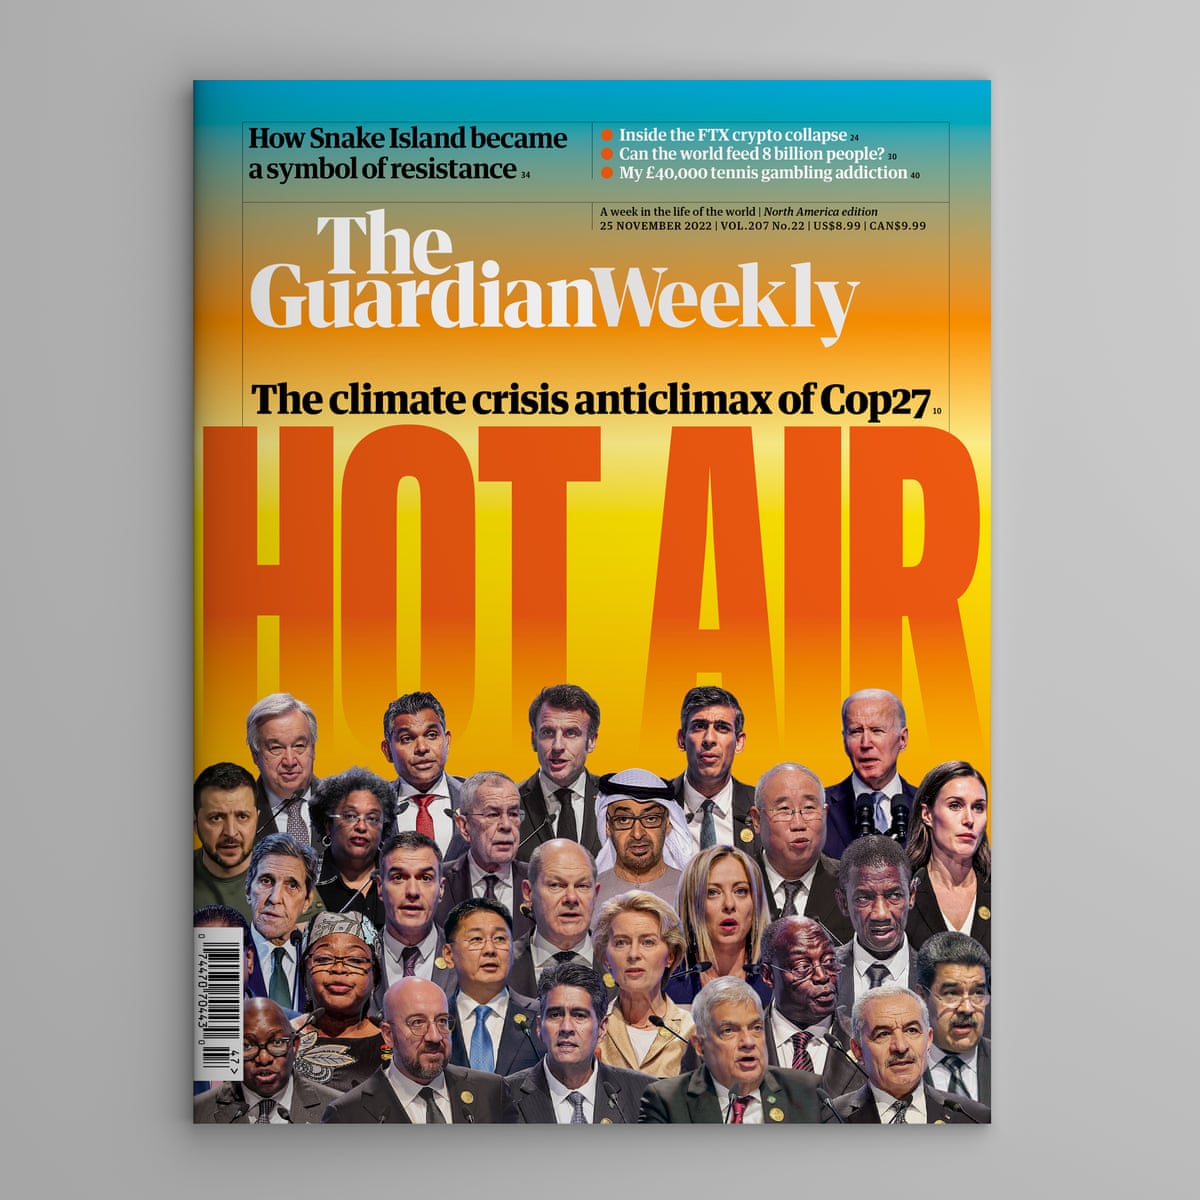 Cop27's climate anticlimax: inside the 25 November Guardian Weekly | Cop27  | The Guardian